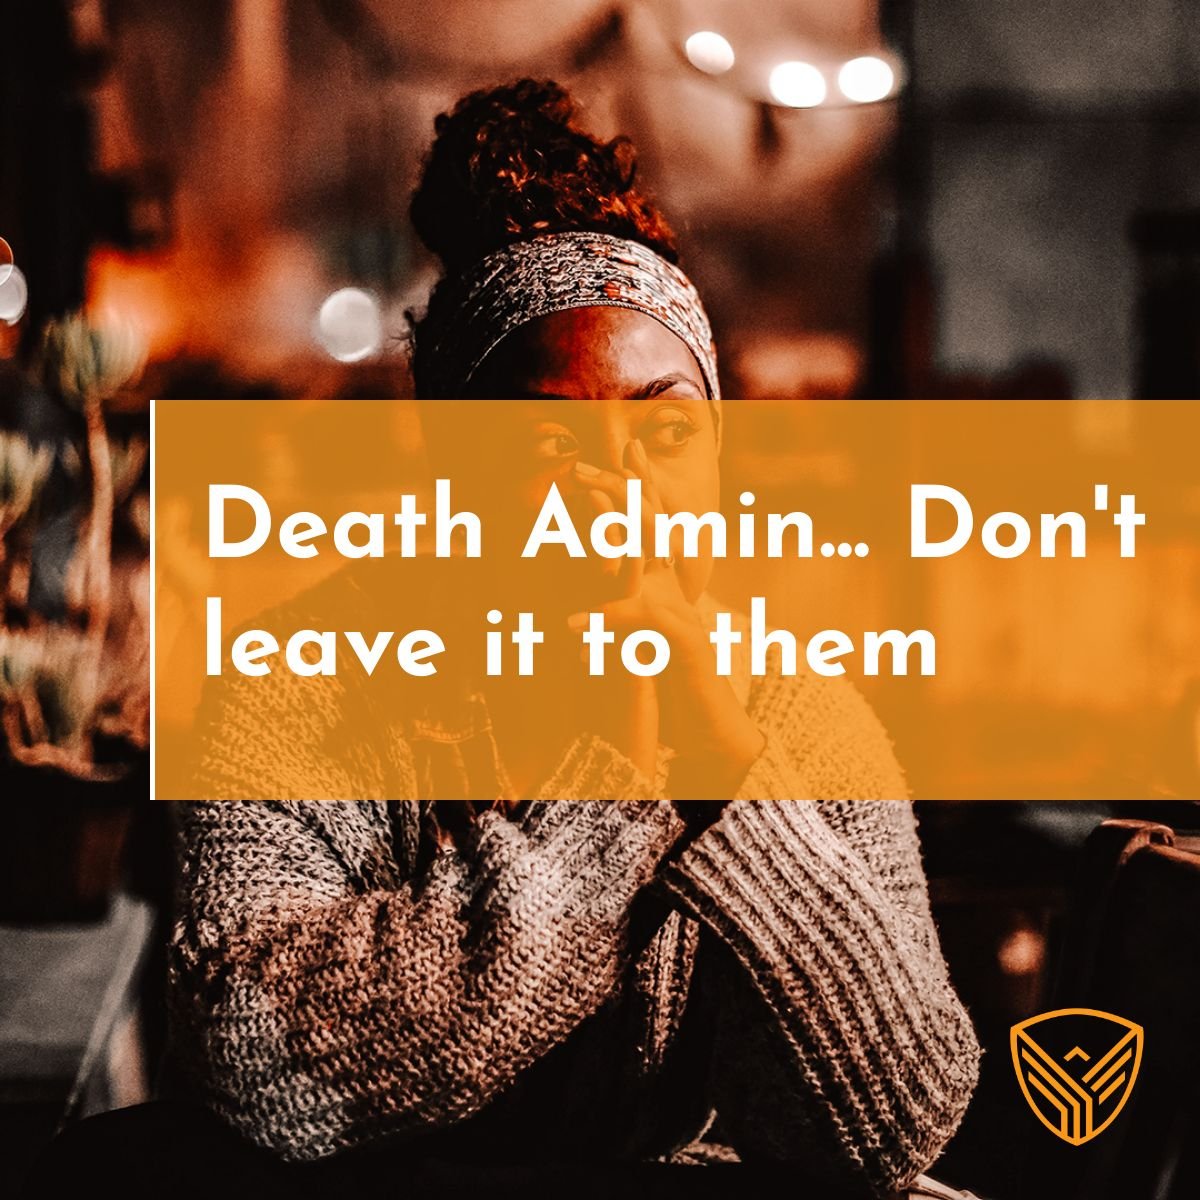 Death Admin… Don’t leave it to them